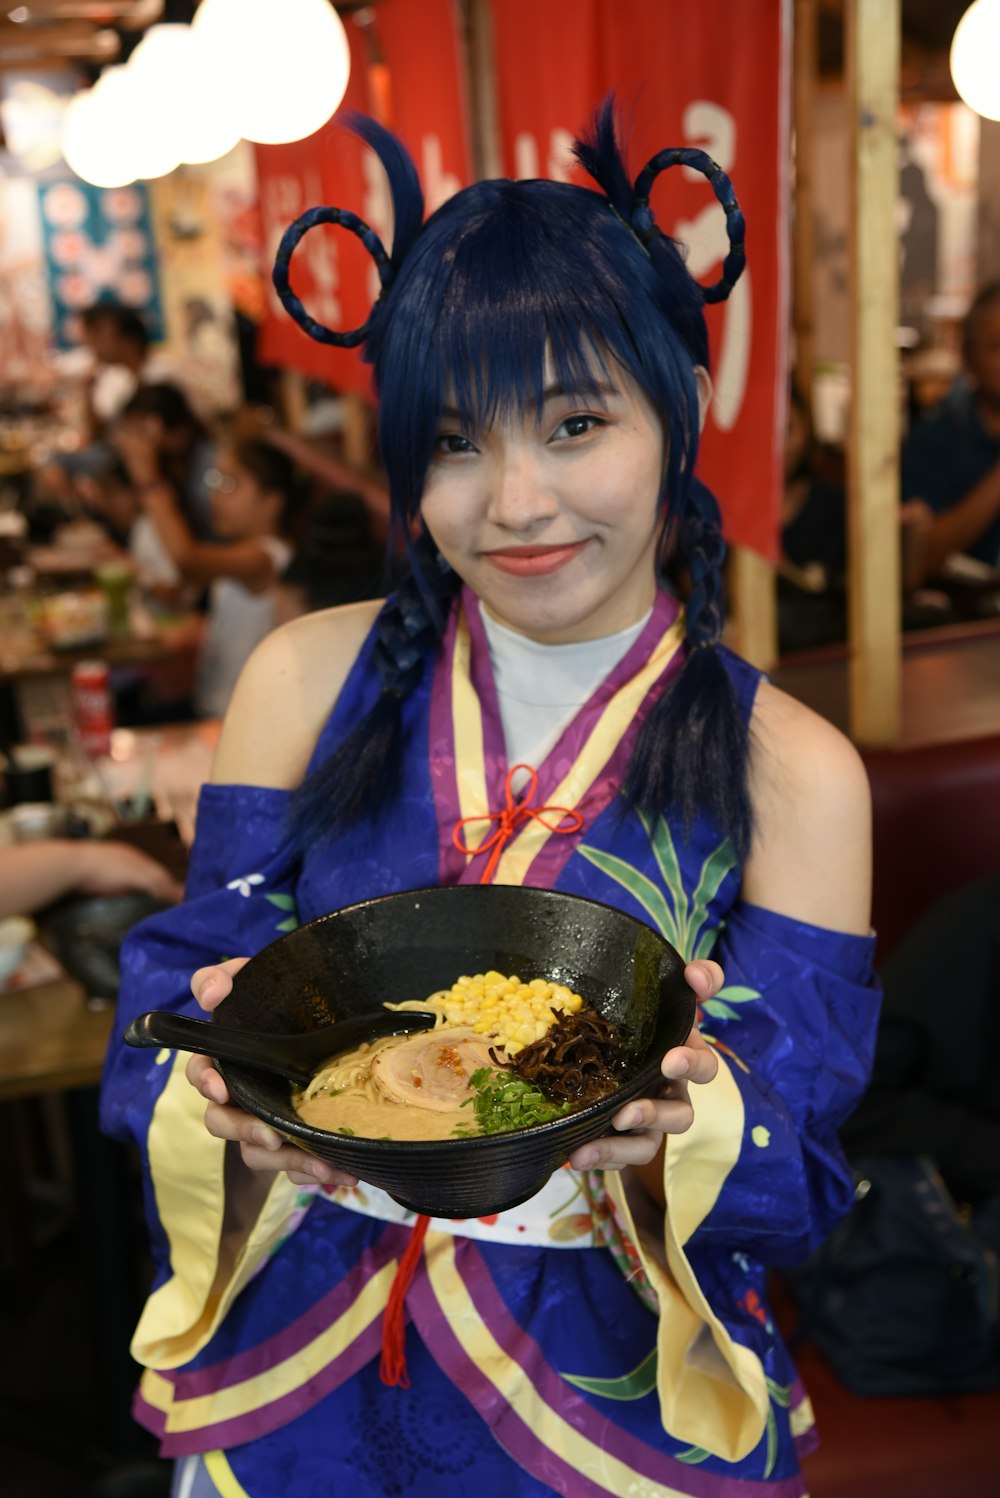 a woman in a costume holding a bowl of food